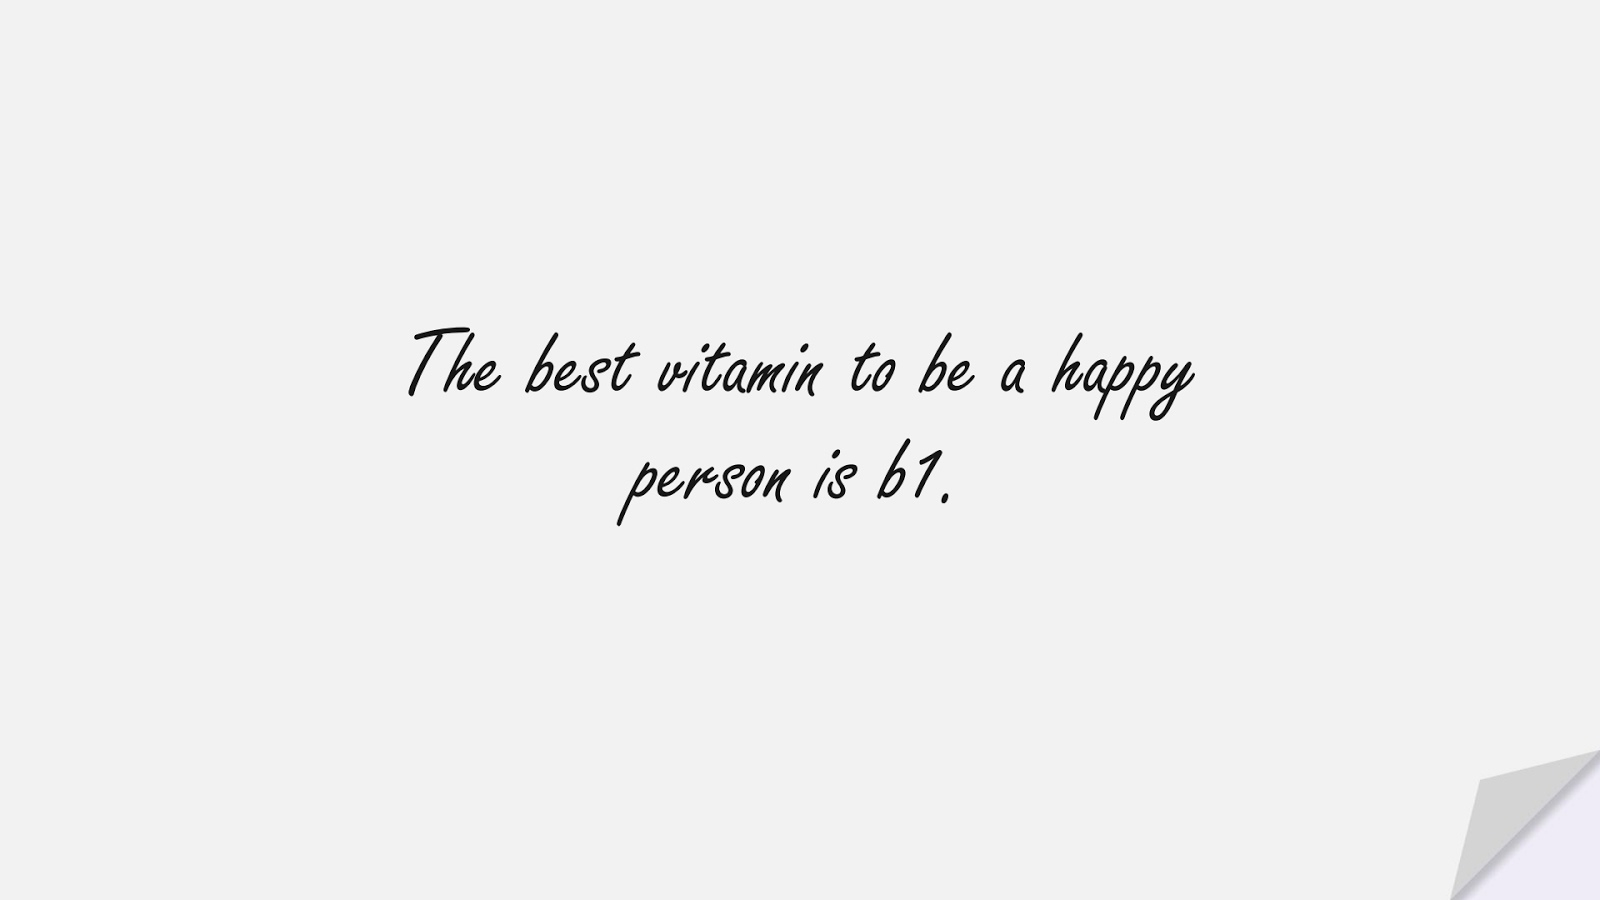 The best vitamin to be a happy person is b1.FALSE